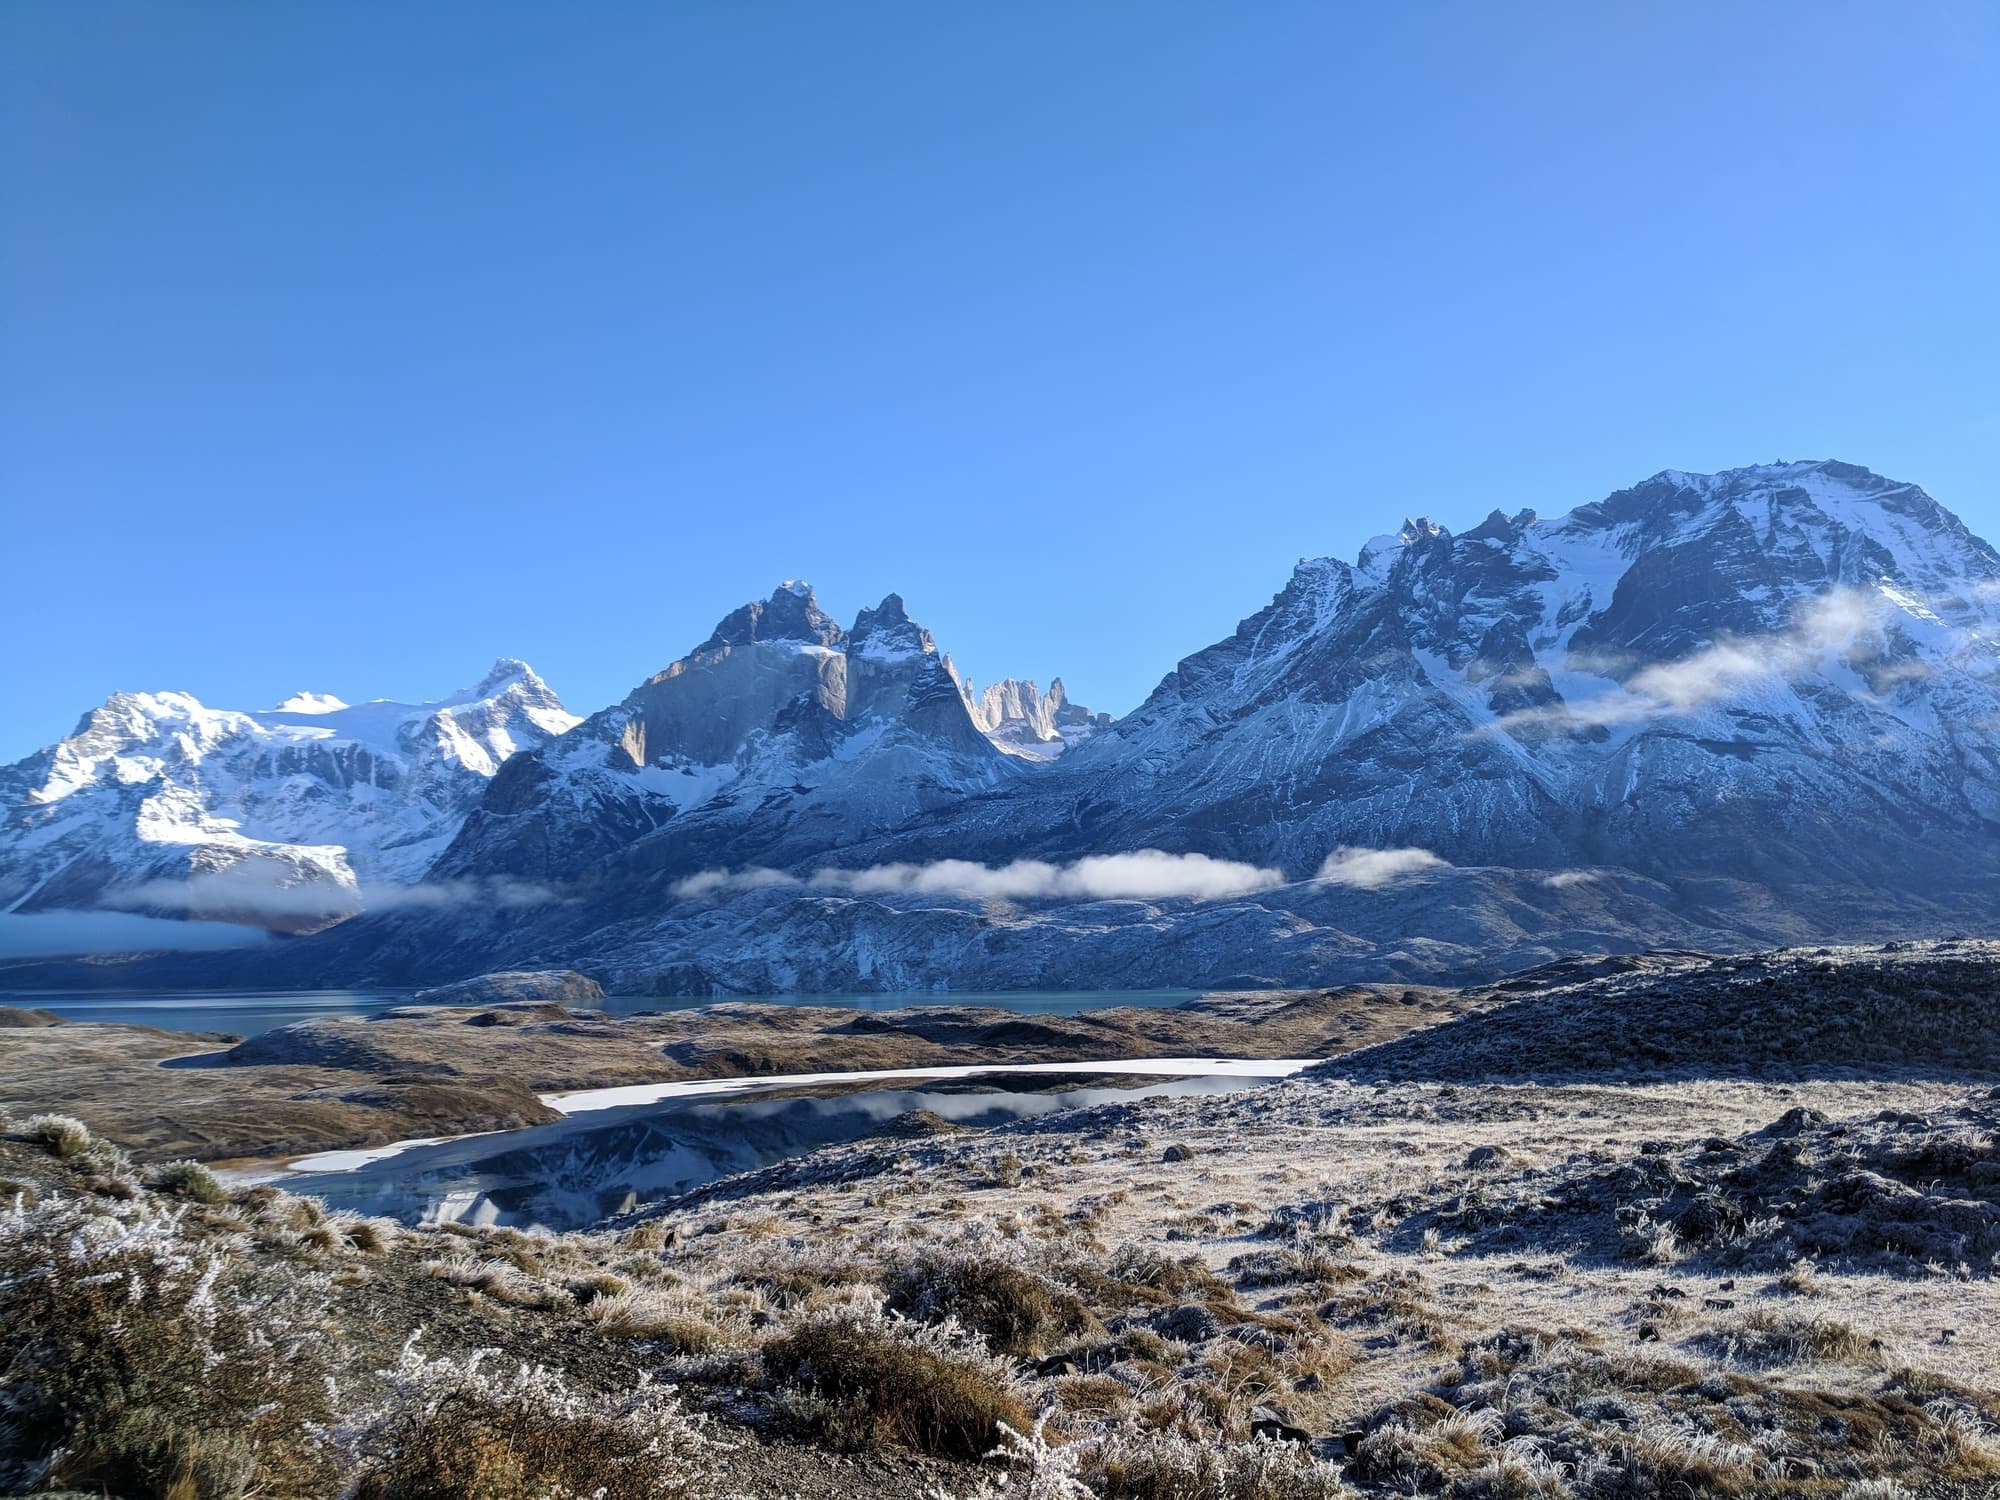 Visiting Torres del Paine in the winter is a great way to beat the Patagonia crowds and winds. Plan your epic trip with these tips for things to do, what to pack, and where to stay.